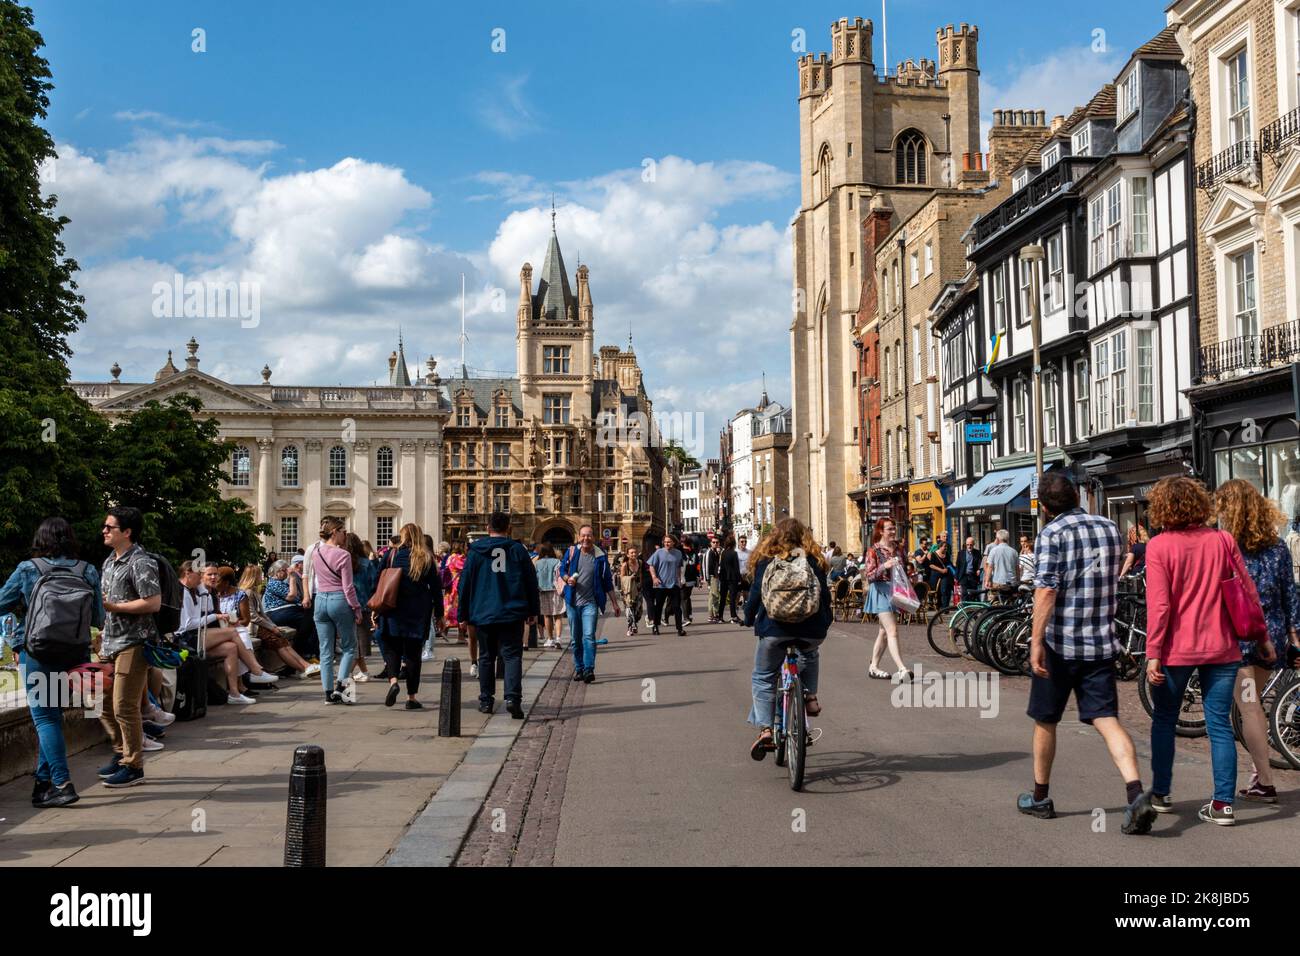 A view of Kings Parade, Cambridge, UK on a busy, sunny day. Stock Photo